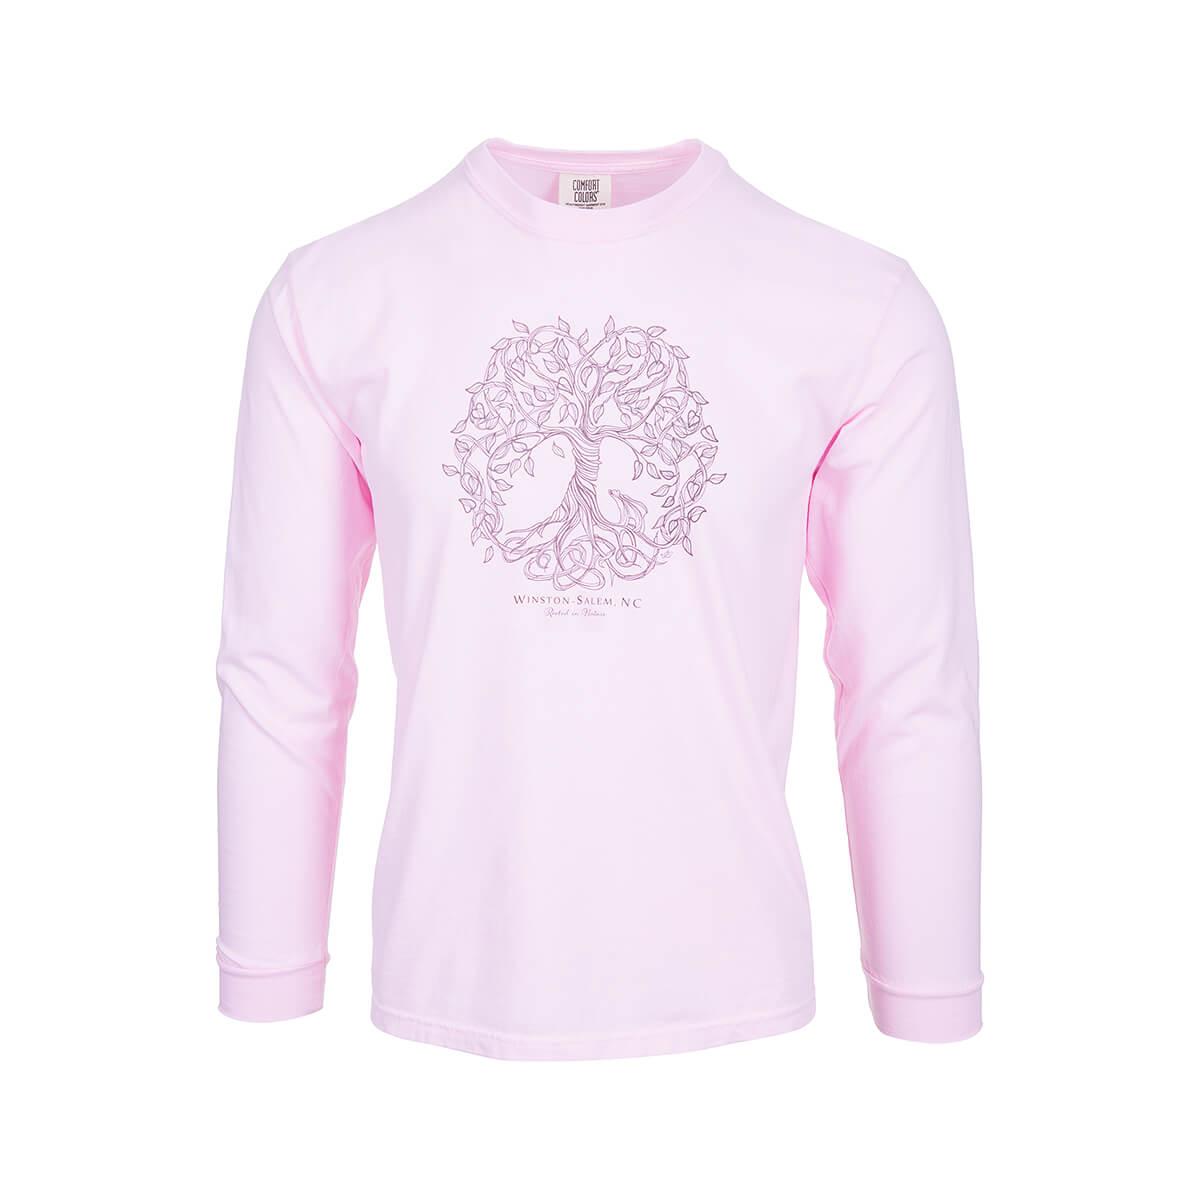  Wrapped Up Blossom Long Sleeve T- Shirt